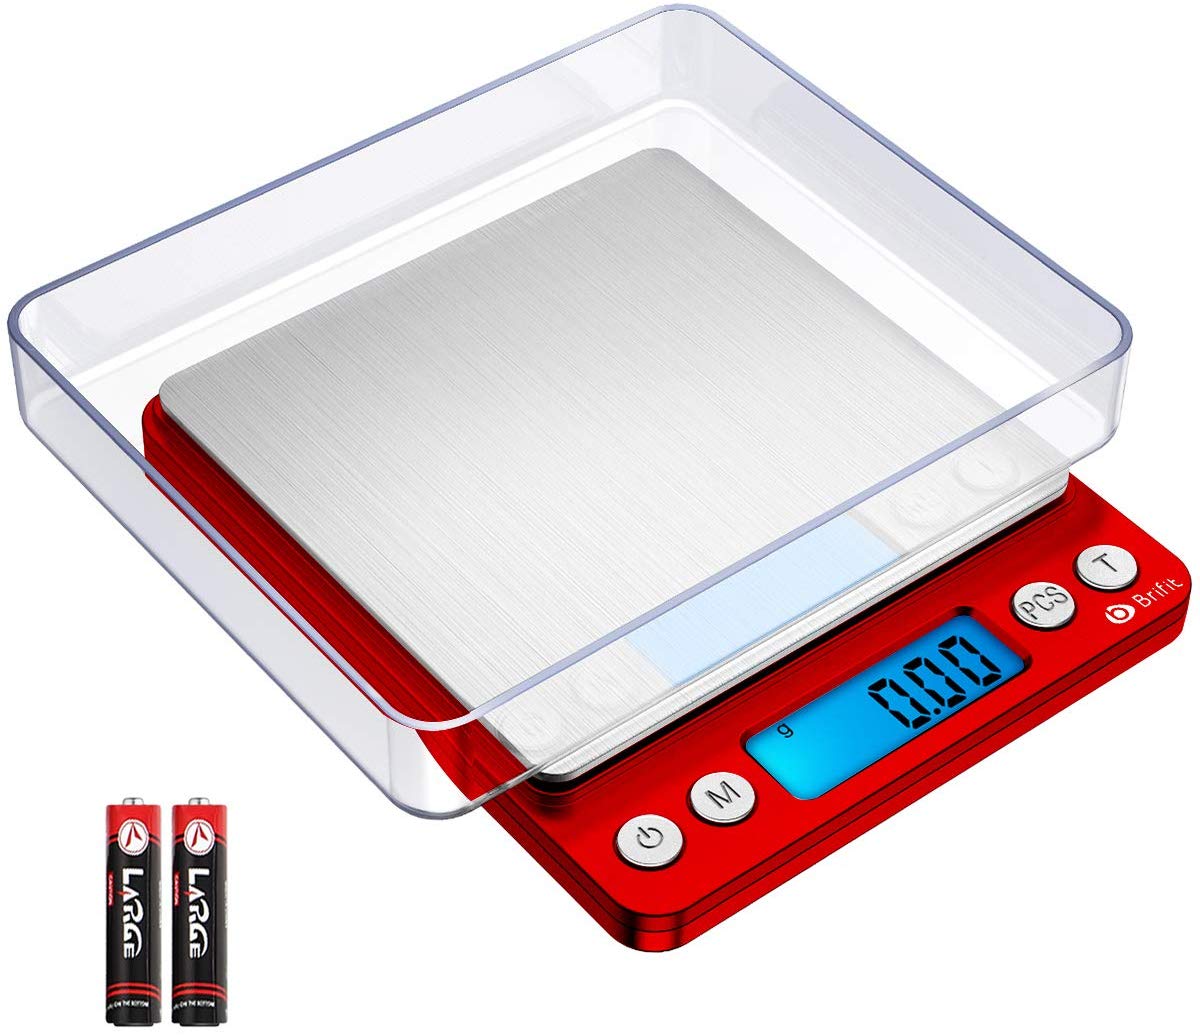 Brifit Upgraded Digital Kitchen Scale, 500g-0.01g Mini Pocket Jewelry Scale, Cooking Food Scale with Back-Lit LCD Display, 2 Trays, 6 Units, Auto Off, Tare, Stainless Steel